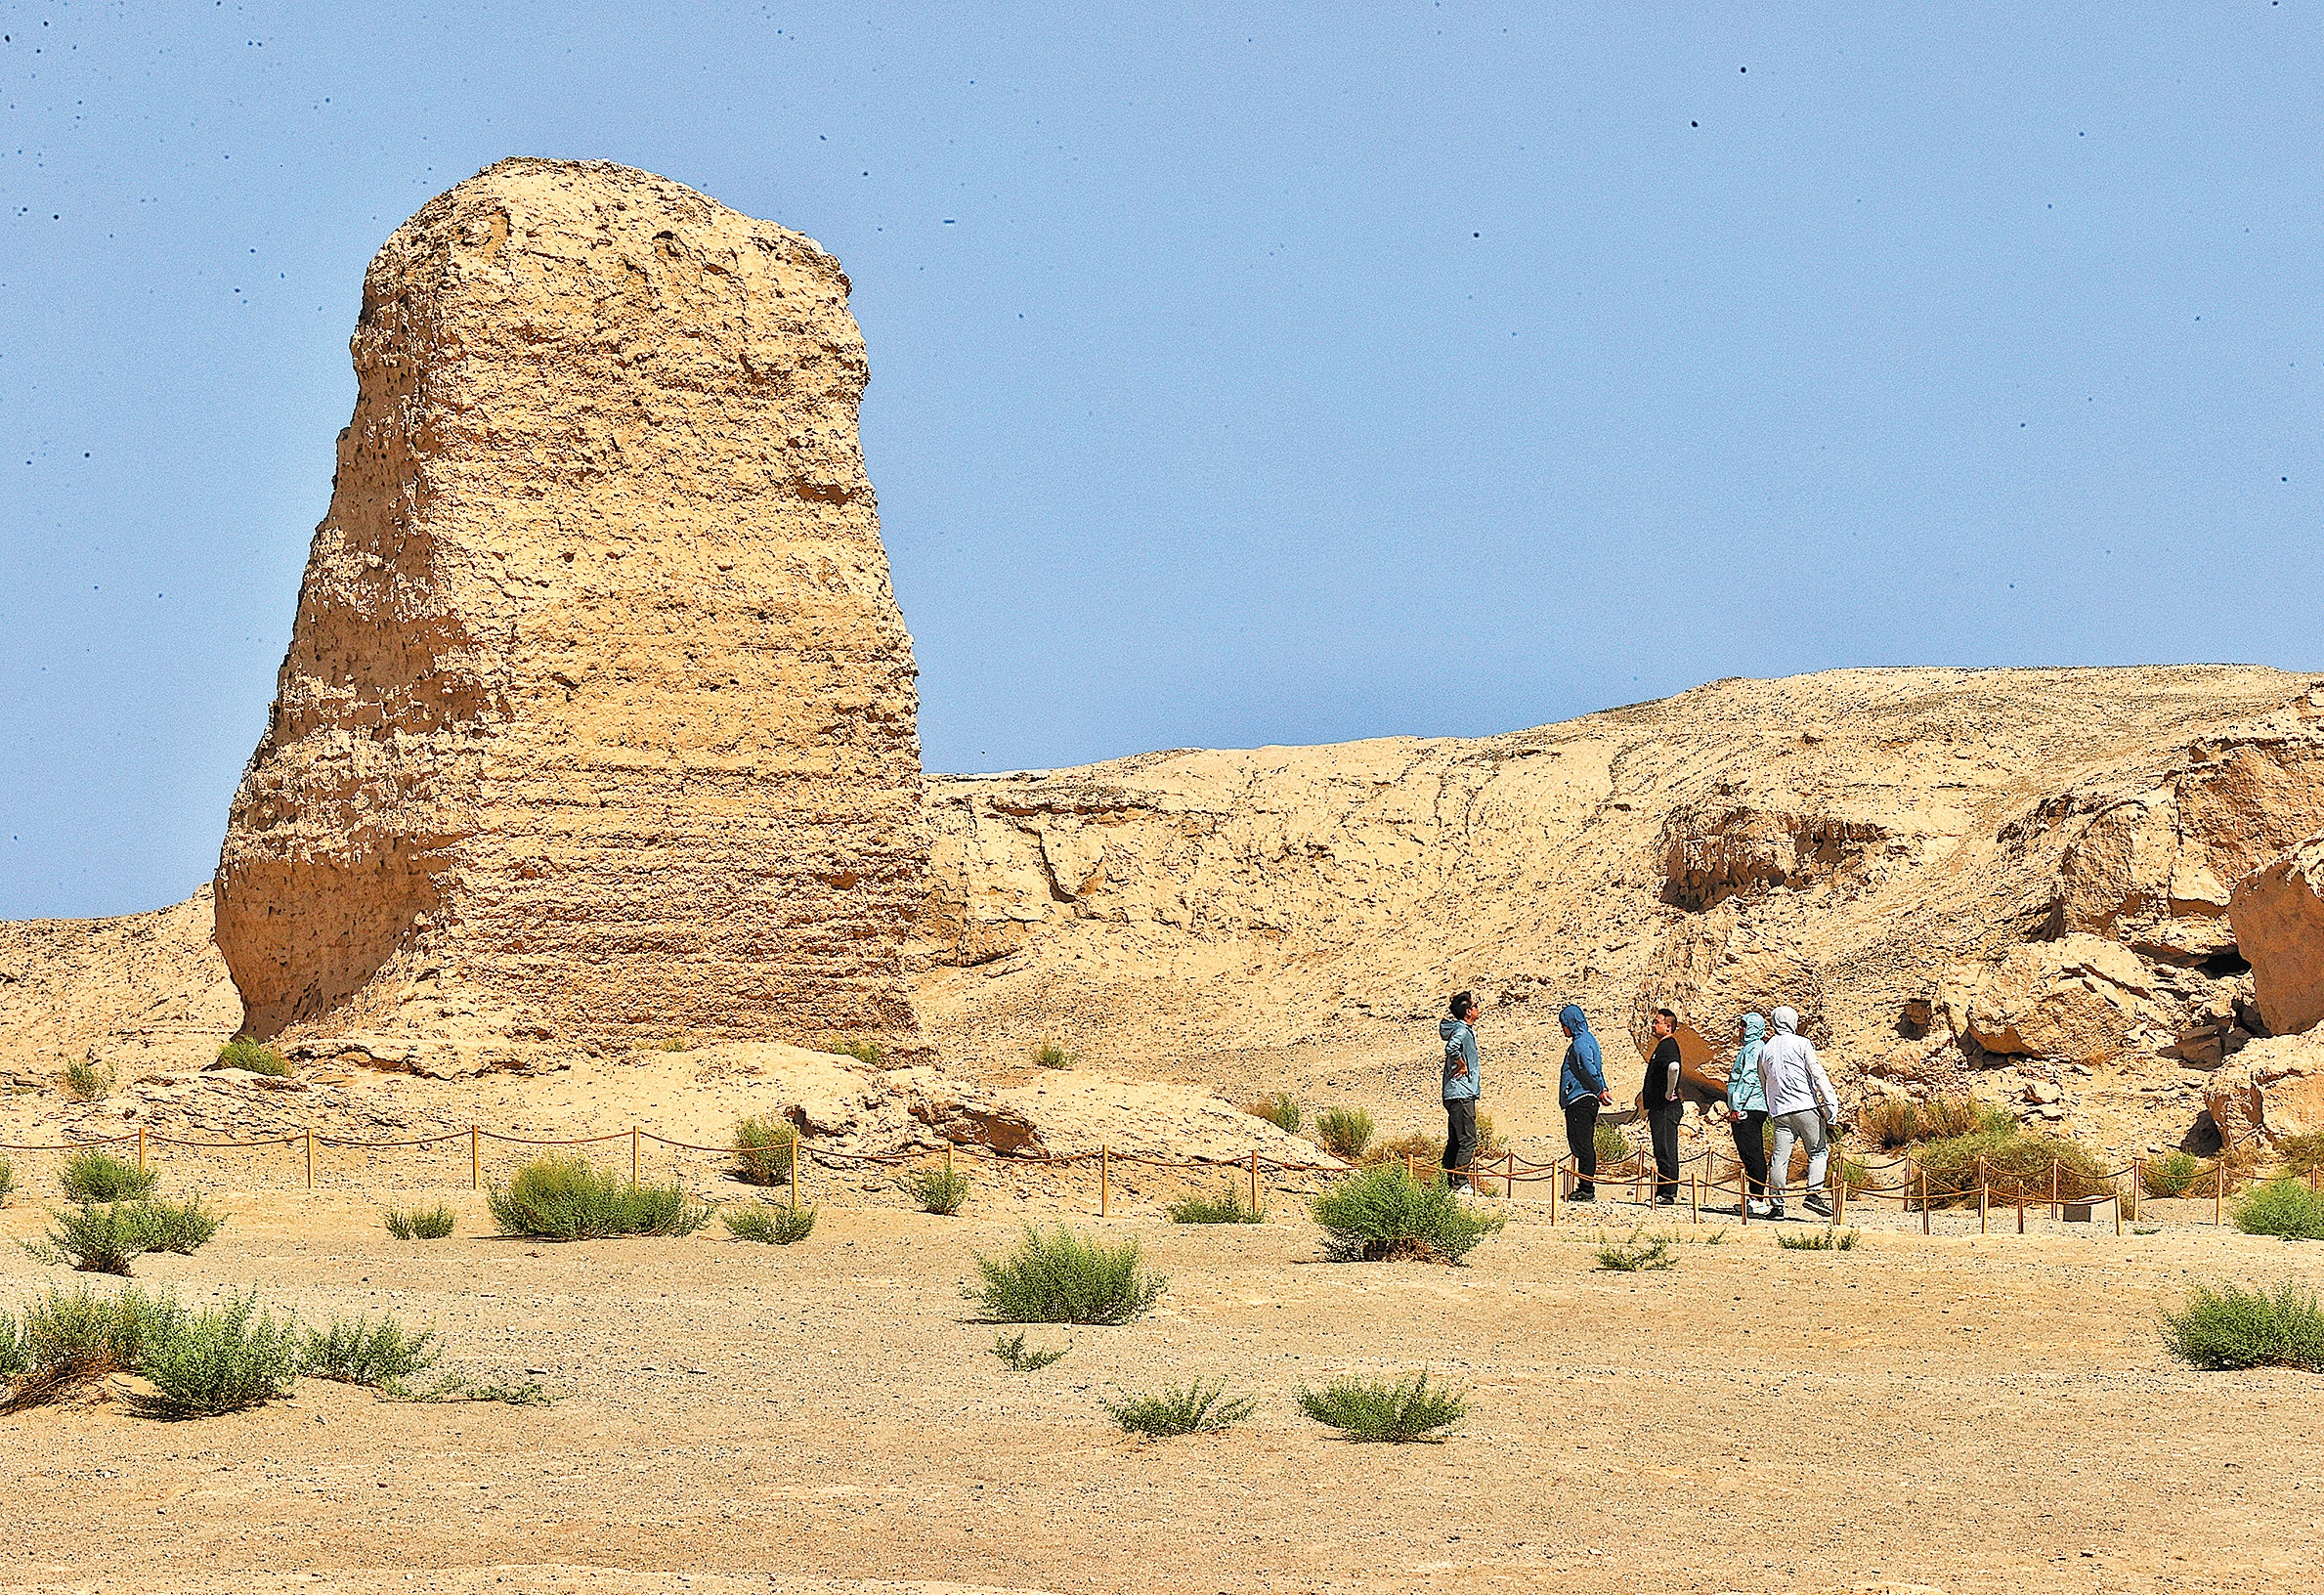 Visitors at the ruins of a beacon tower of the Han Dynasty (206 BC-220 AD) Great Wall in Dunhuang, Gansu province